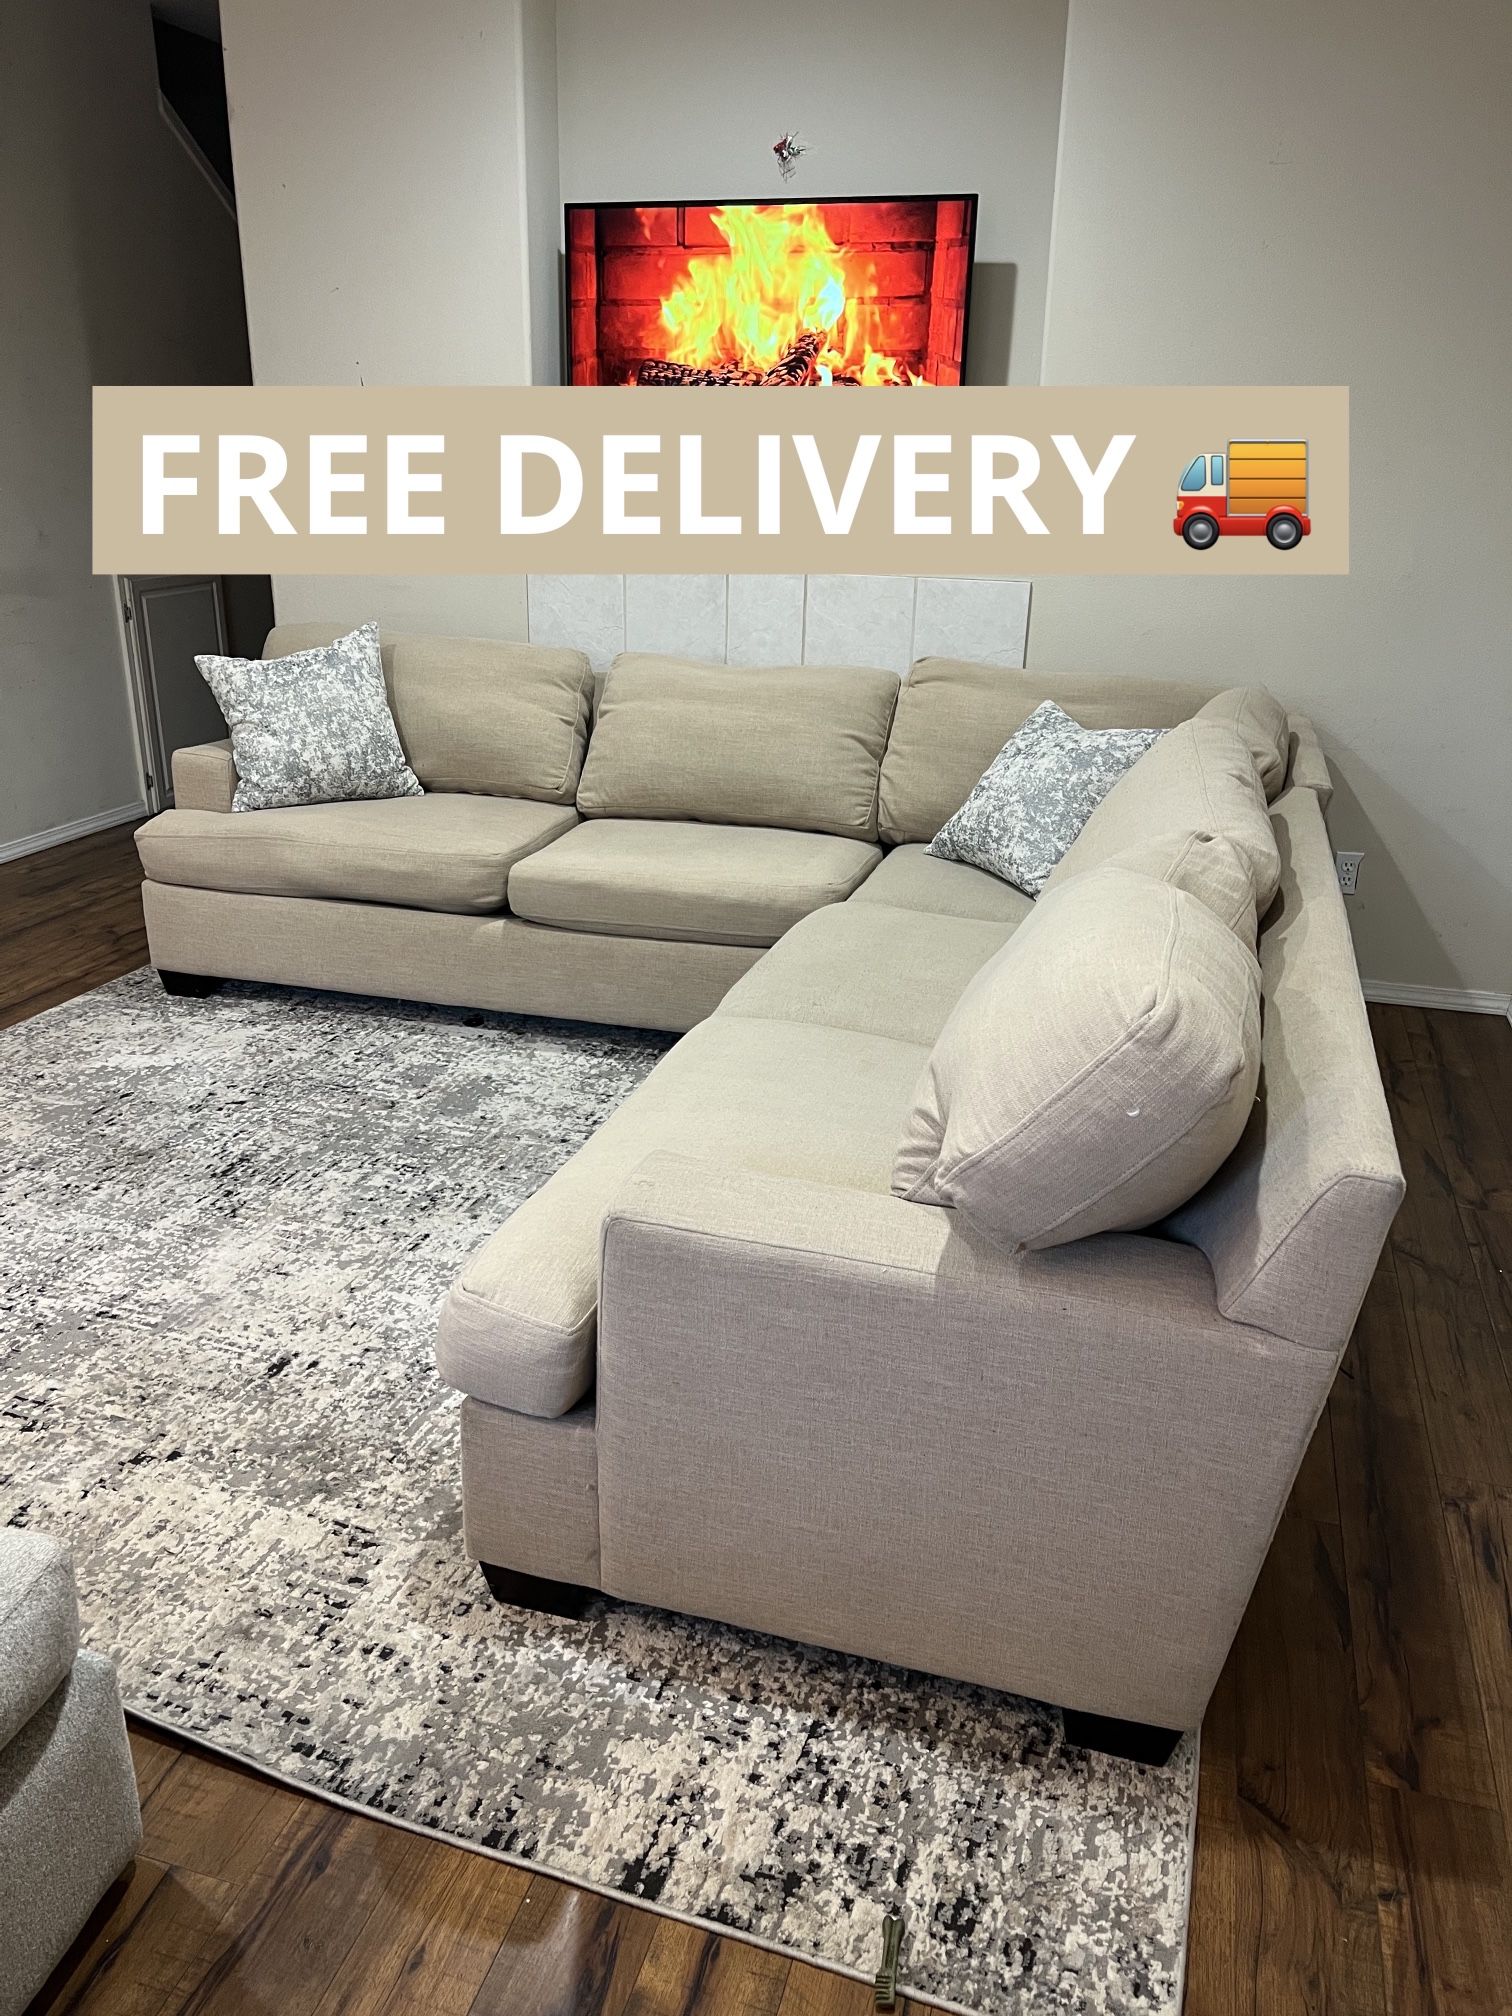 Large Tan Sectional Couch 🛋️- FREE DELIVERY 🚚 